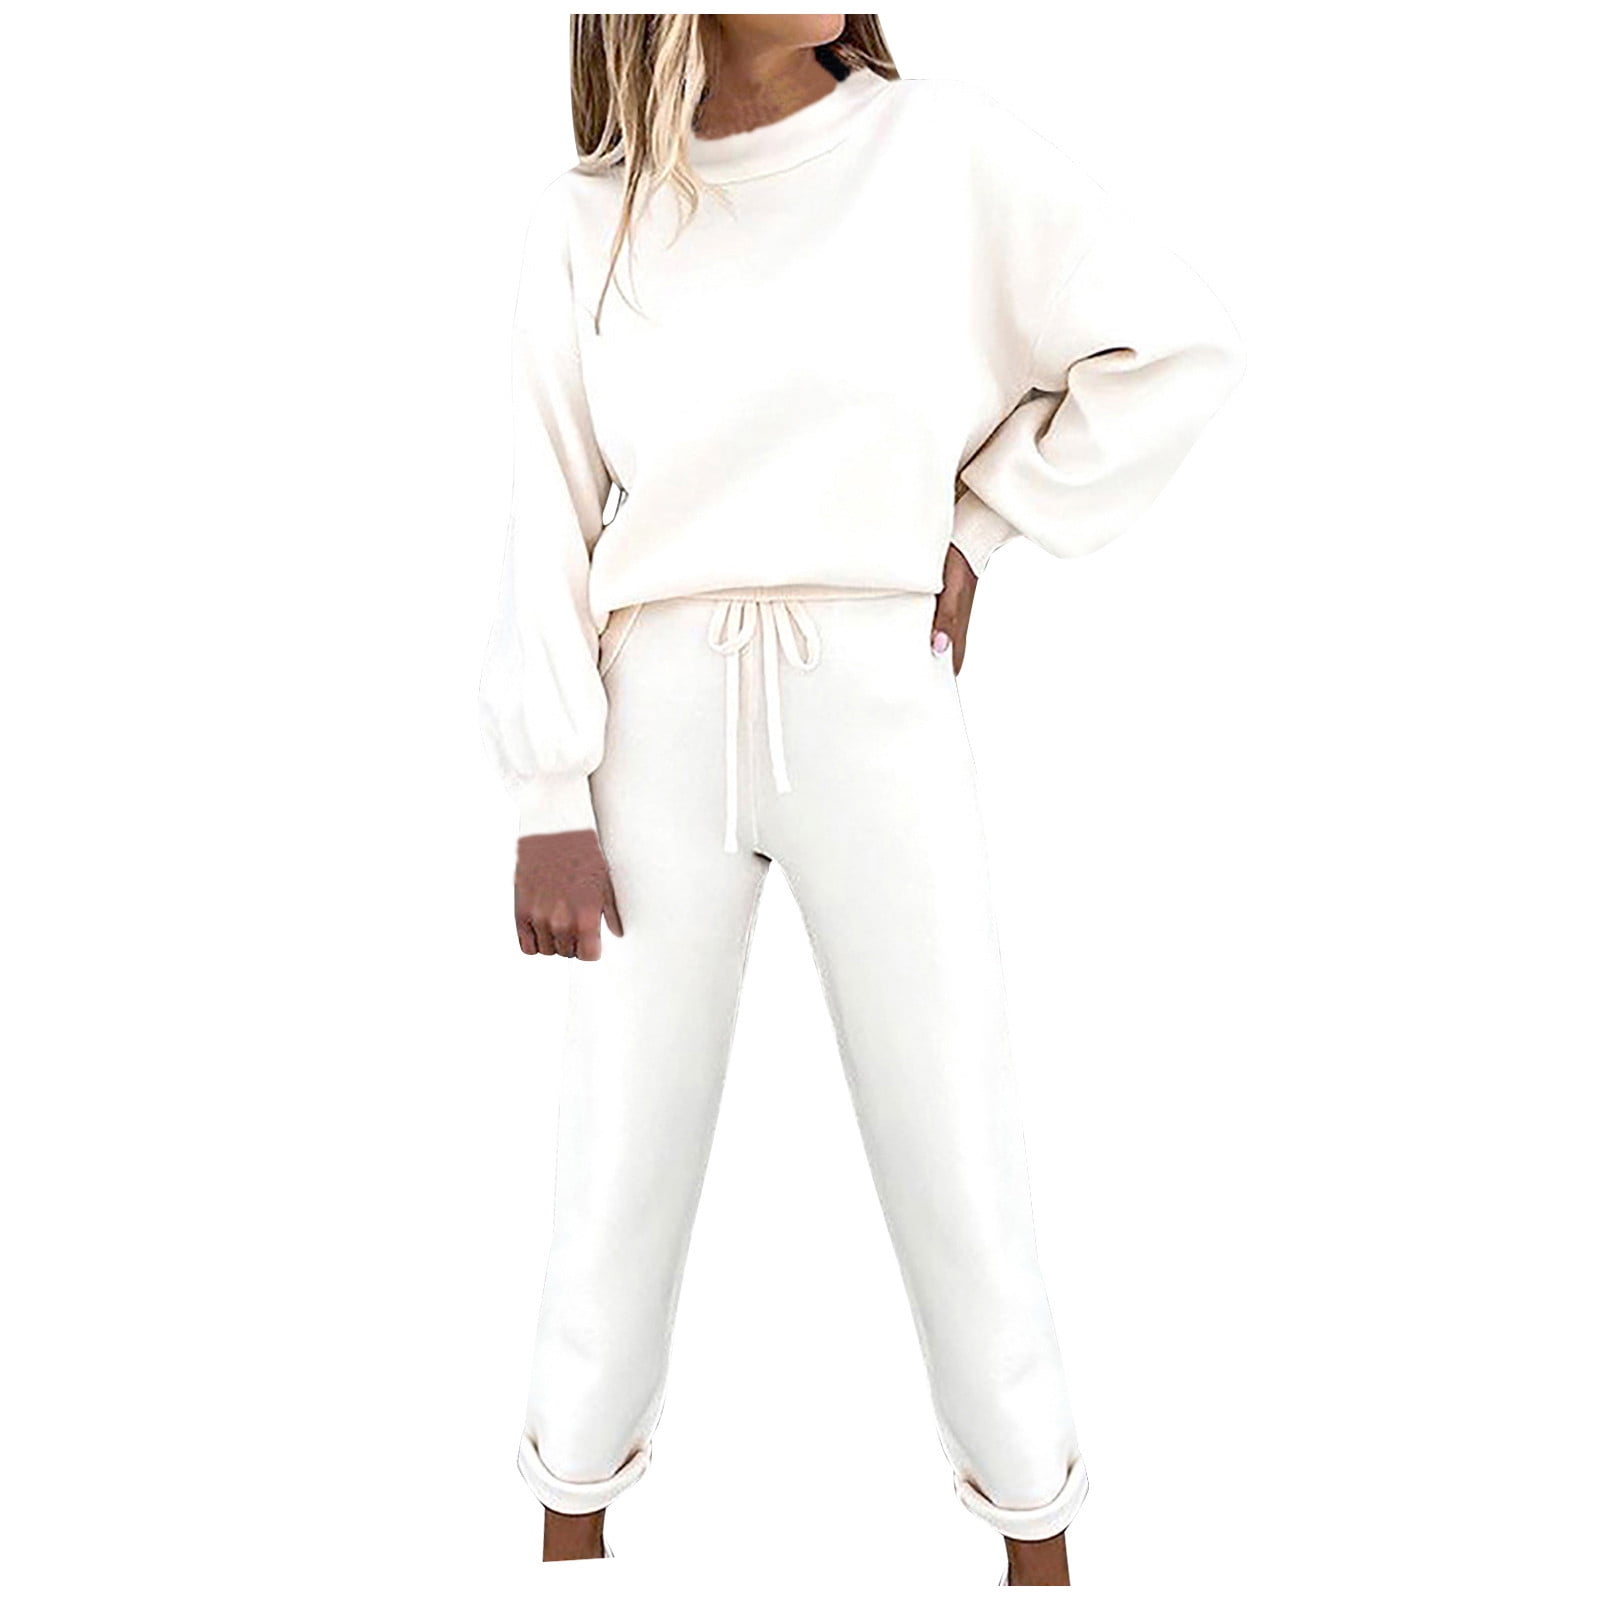 REORIAFEE Outfits for Women Lounge Workout Outfits 2PC Fashion Women Round  Neck Long Sleeve Blouse + Loose Pants Sets White XXXL 